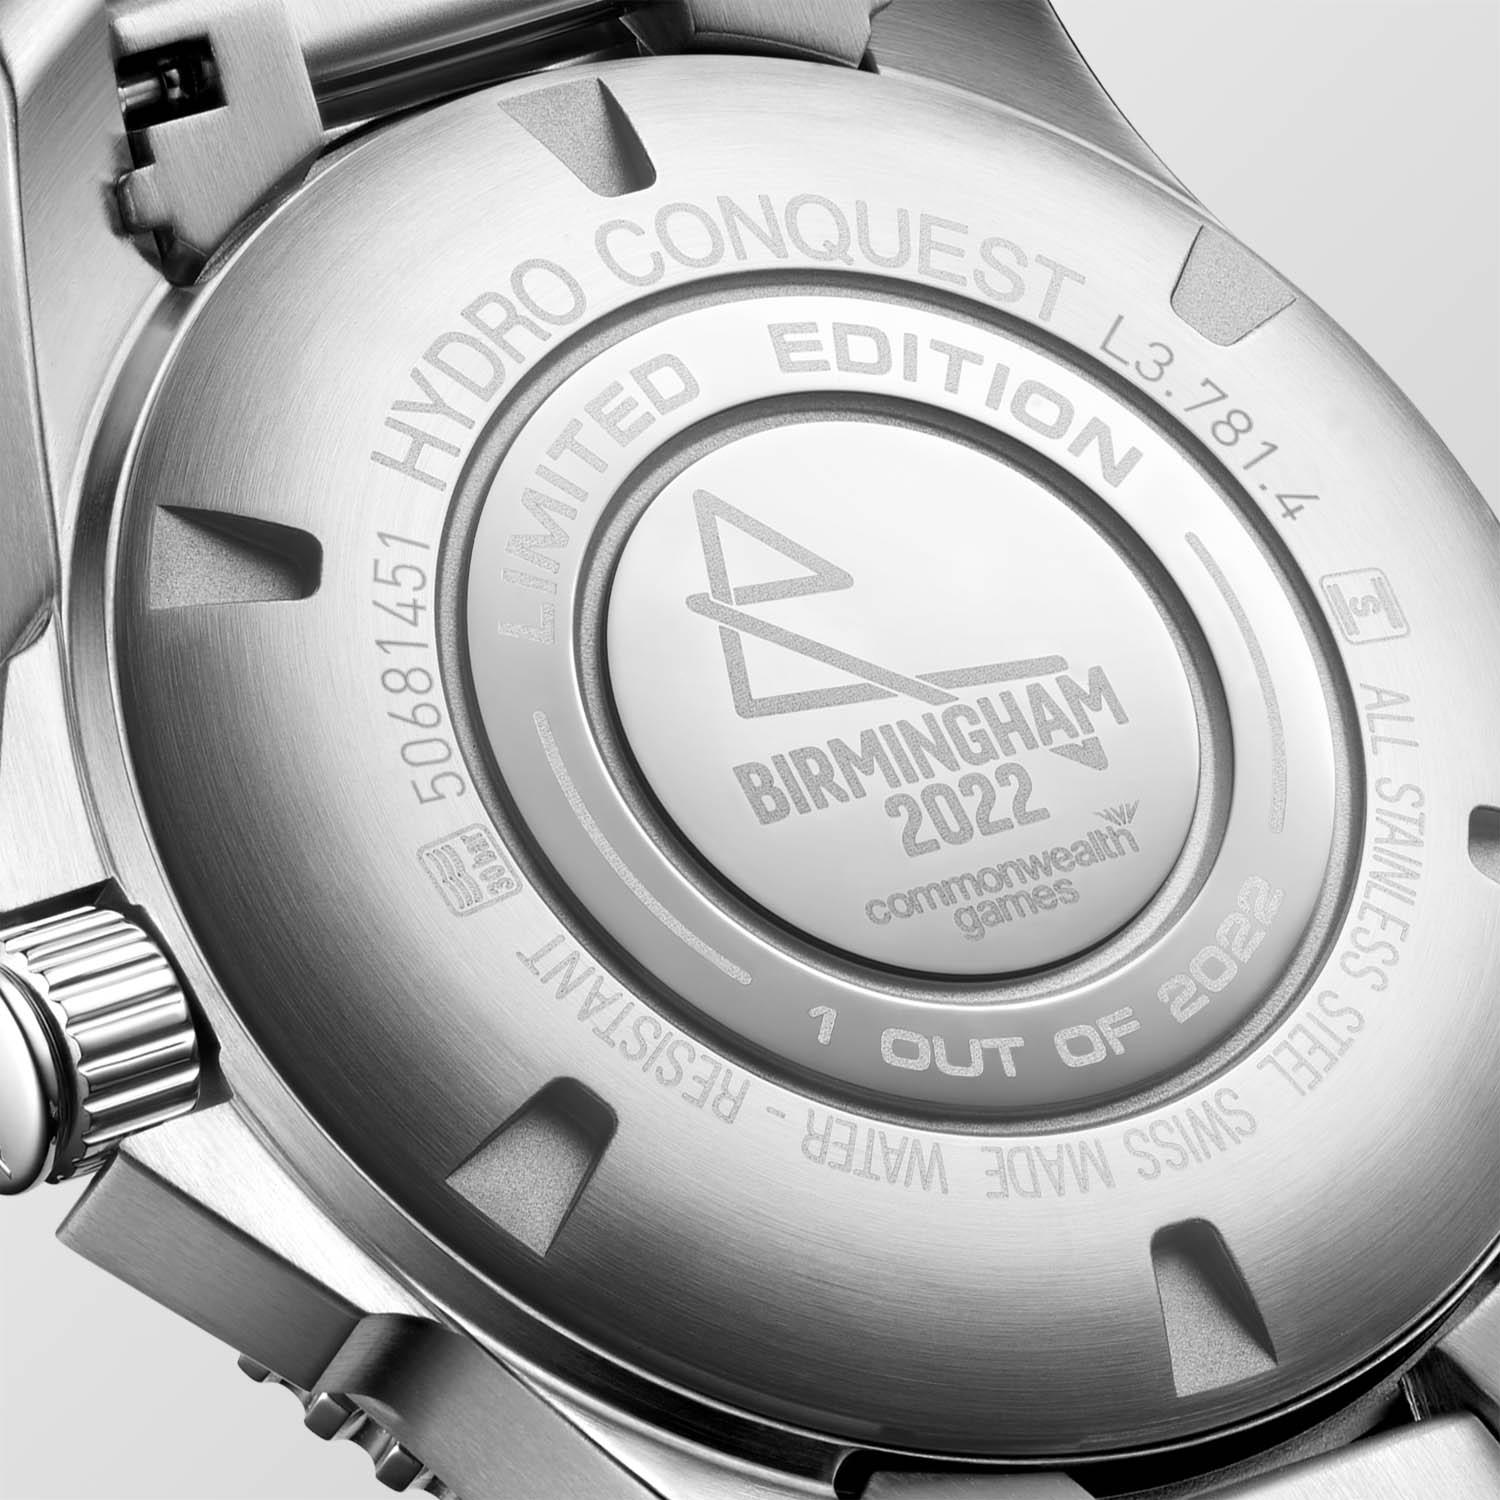 Longines HydroConquest XXII Commonwealth Games Limited Edition